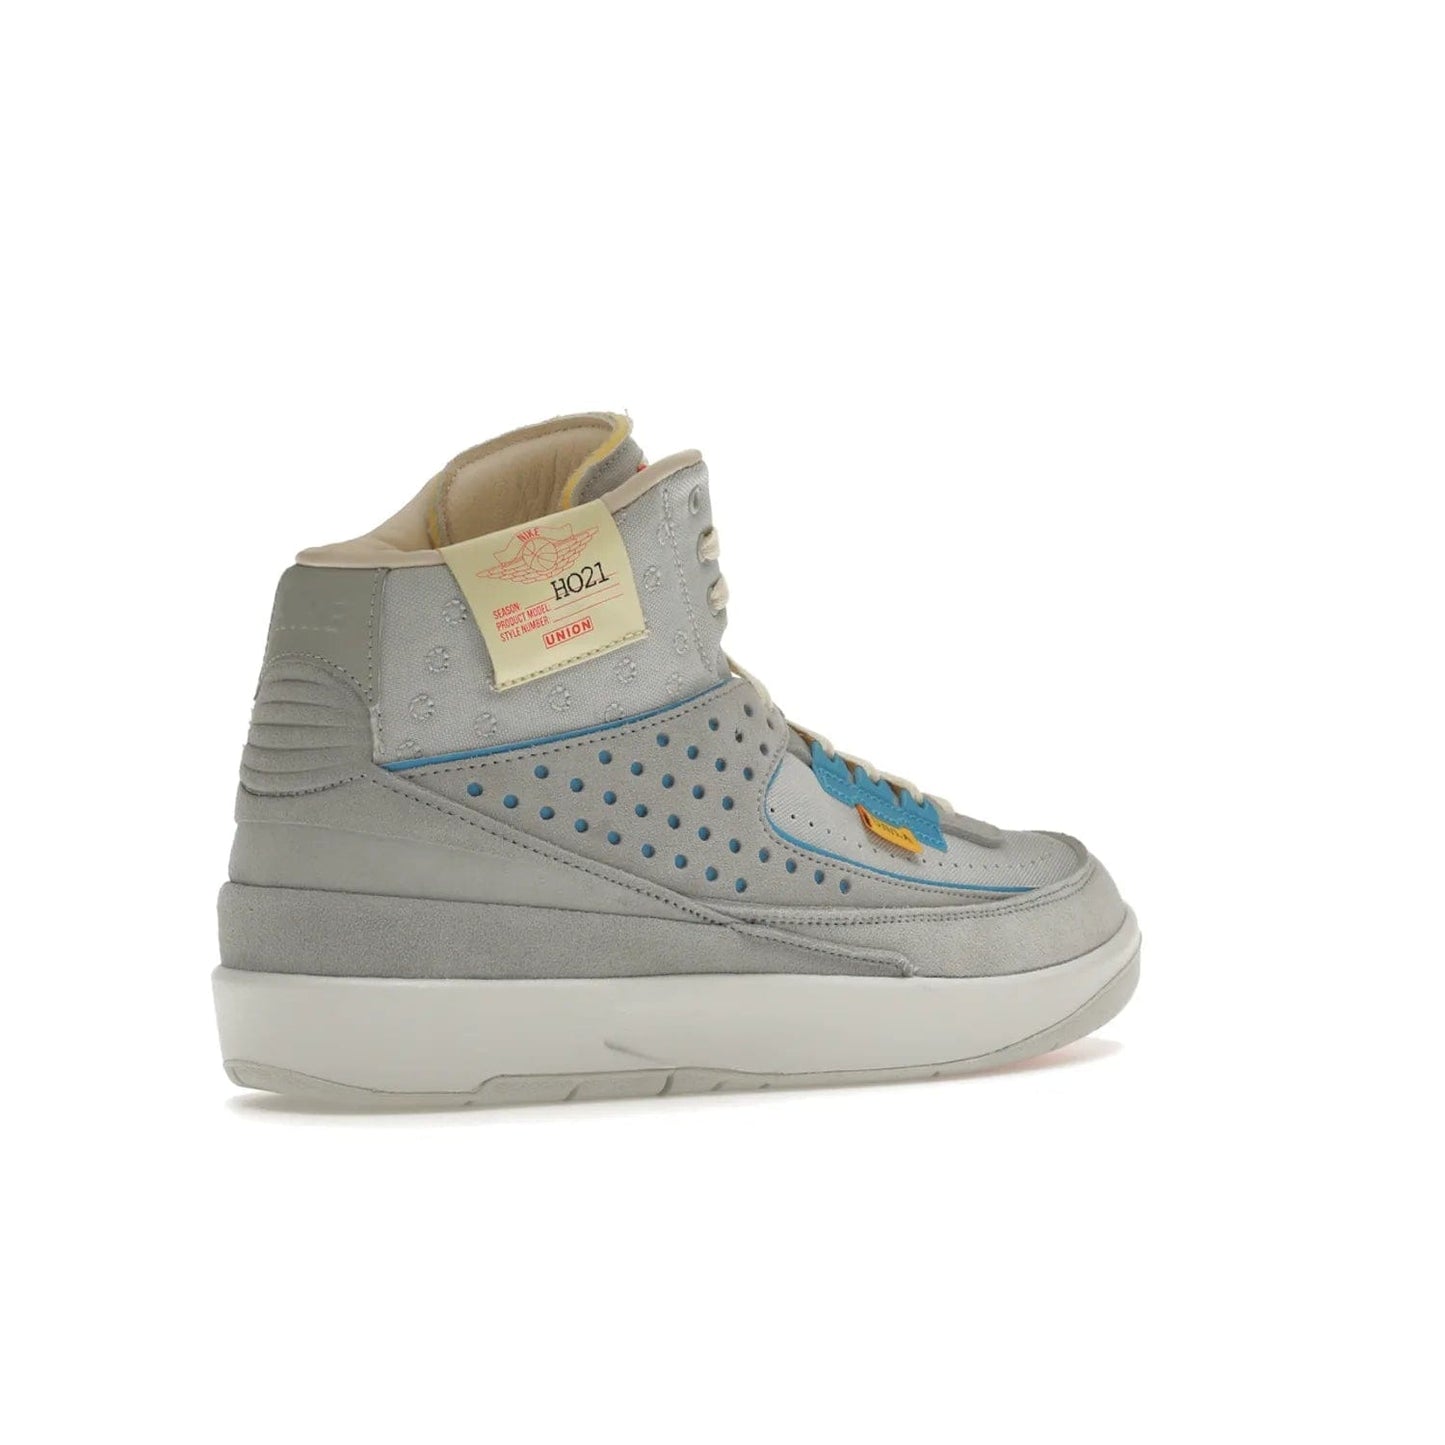 Jordan 2 Retro SP Union Grey Fog - Image 33 - Only at www.BallersClubKickz.com - Introducing the Air Jordan 2 Retro SP Union Grey Fog. This intricate sneaker design features a grey canvas upper with light blue eyelets, eyestay patches, and piping, plus custom external tags. Dropping in April 2022, this exclusive release offers a worn-in look and feel.